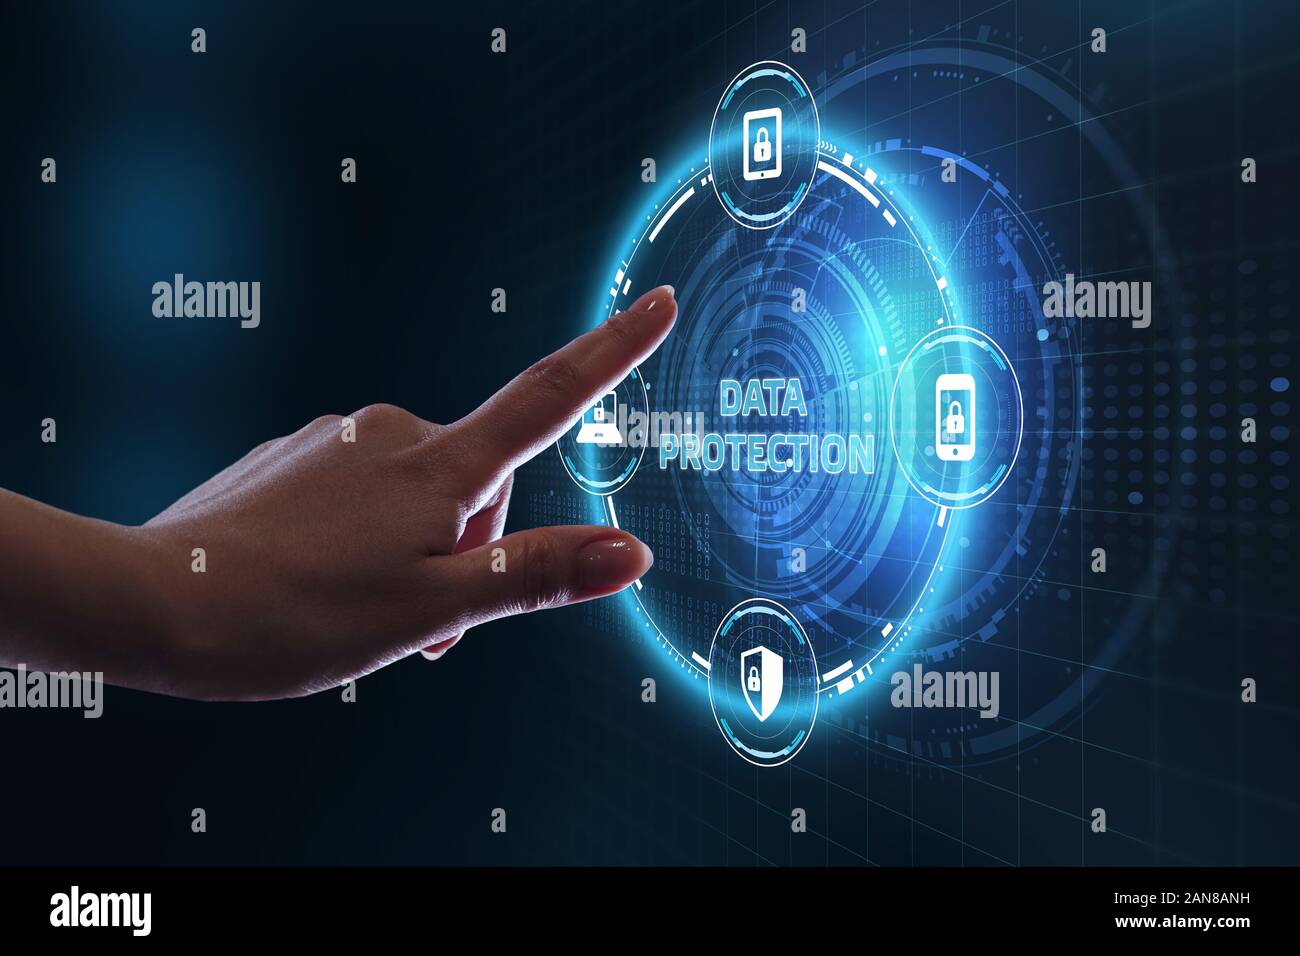 Business, technology, internet and networking concept. Young businessman select the icon Data protection  on the virtual display. Stock Photo